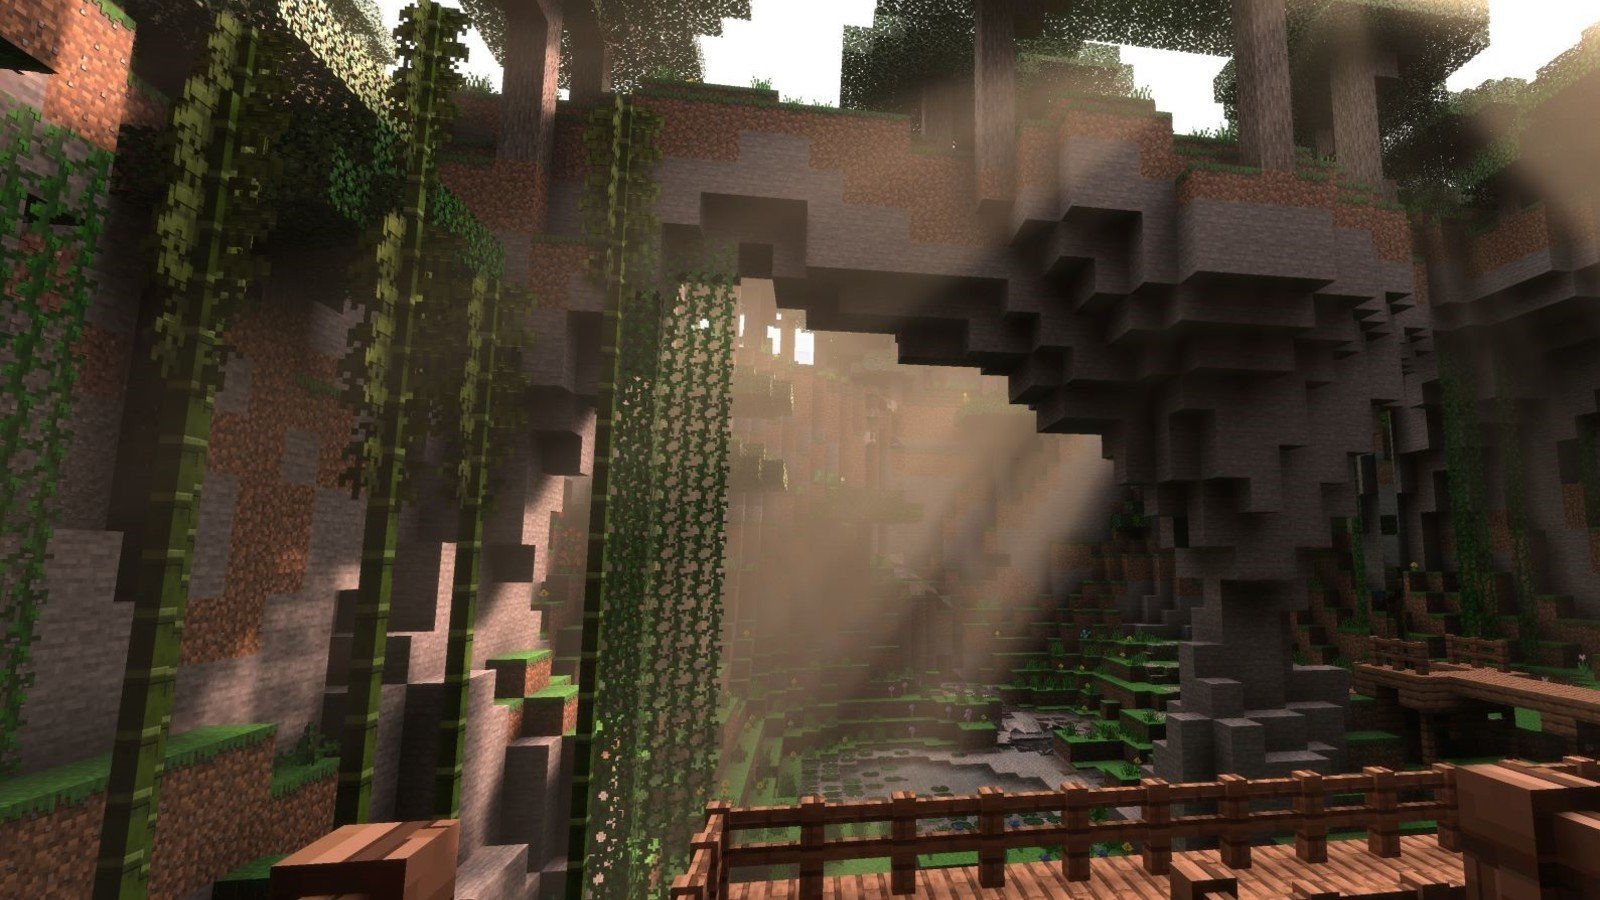 Minecraft: Bedrock Edition with Ray Tracing and Advanced Graphics FAQ